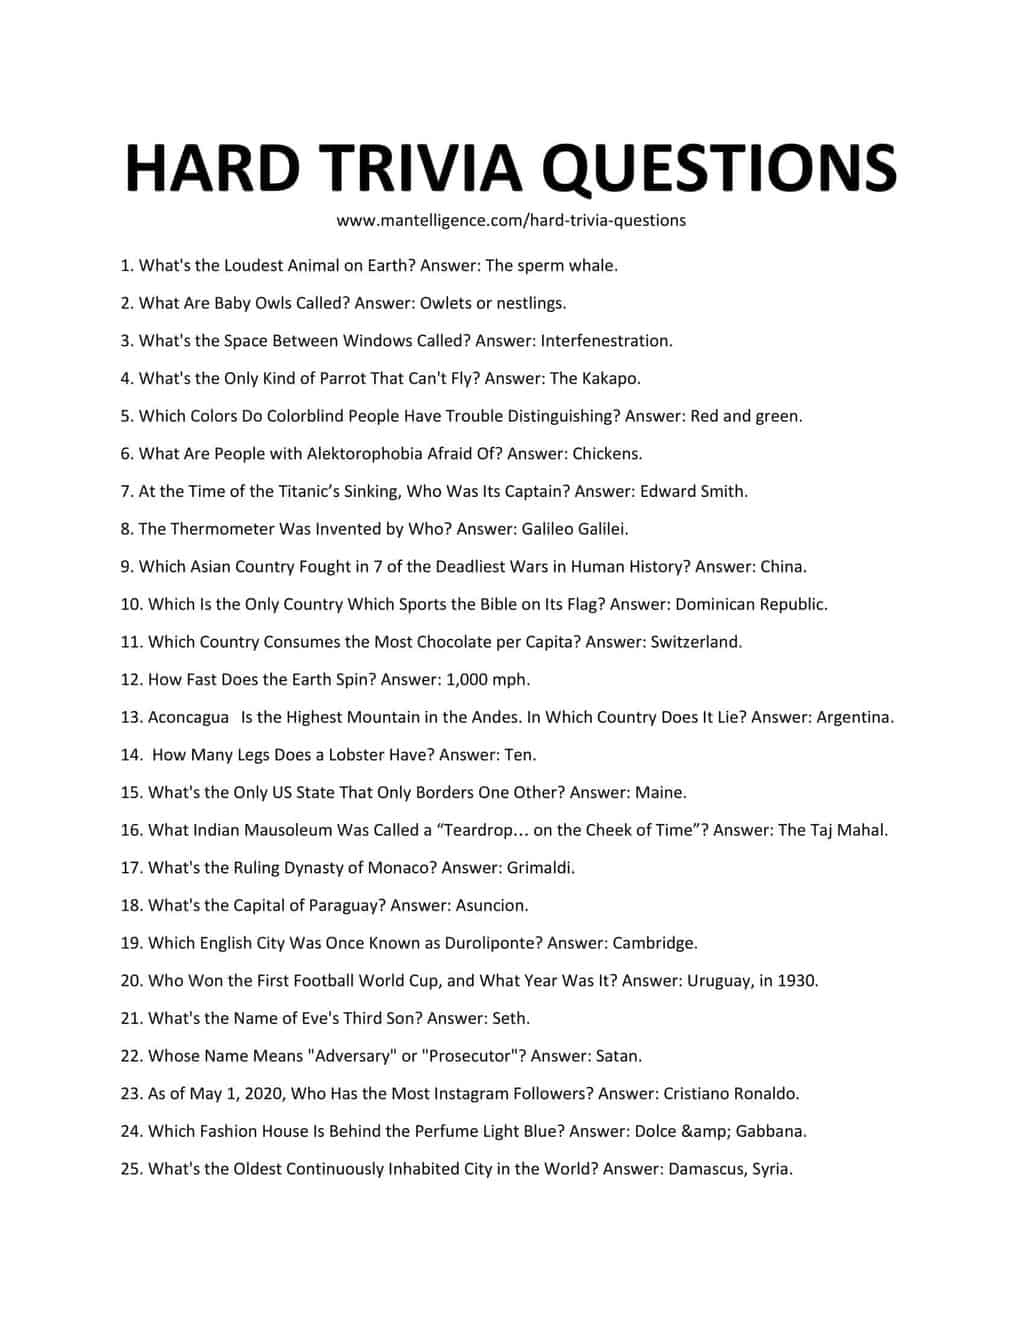 Hard Trivia Questions And Answers